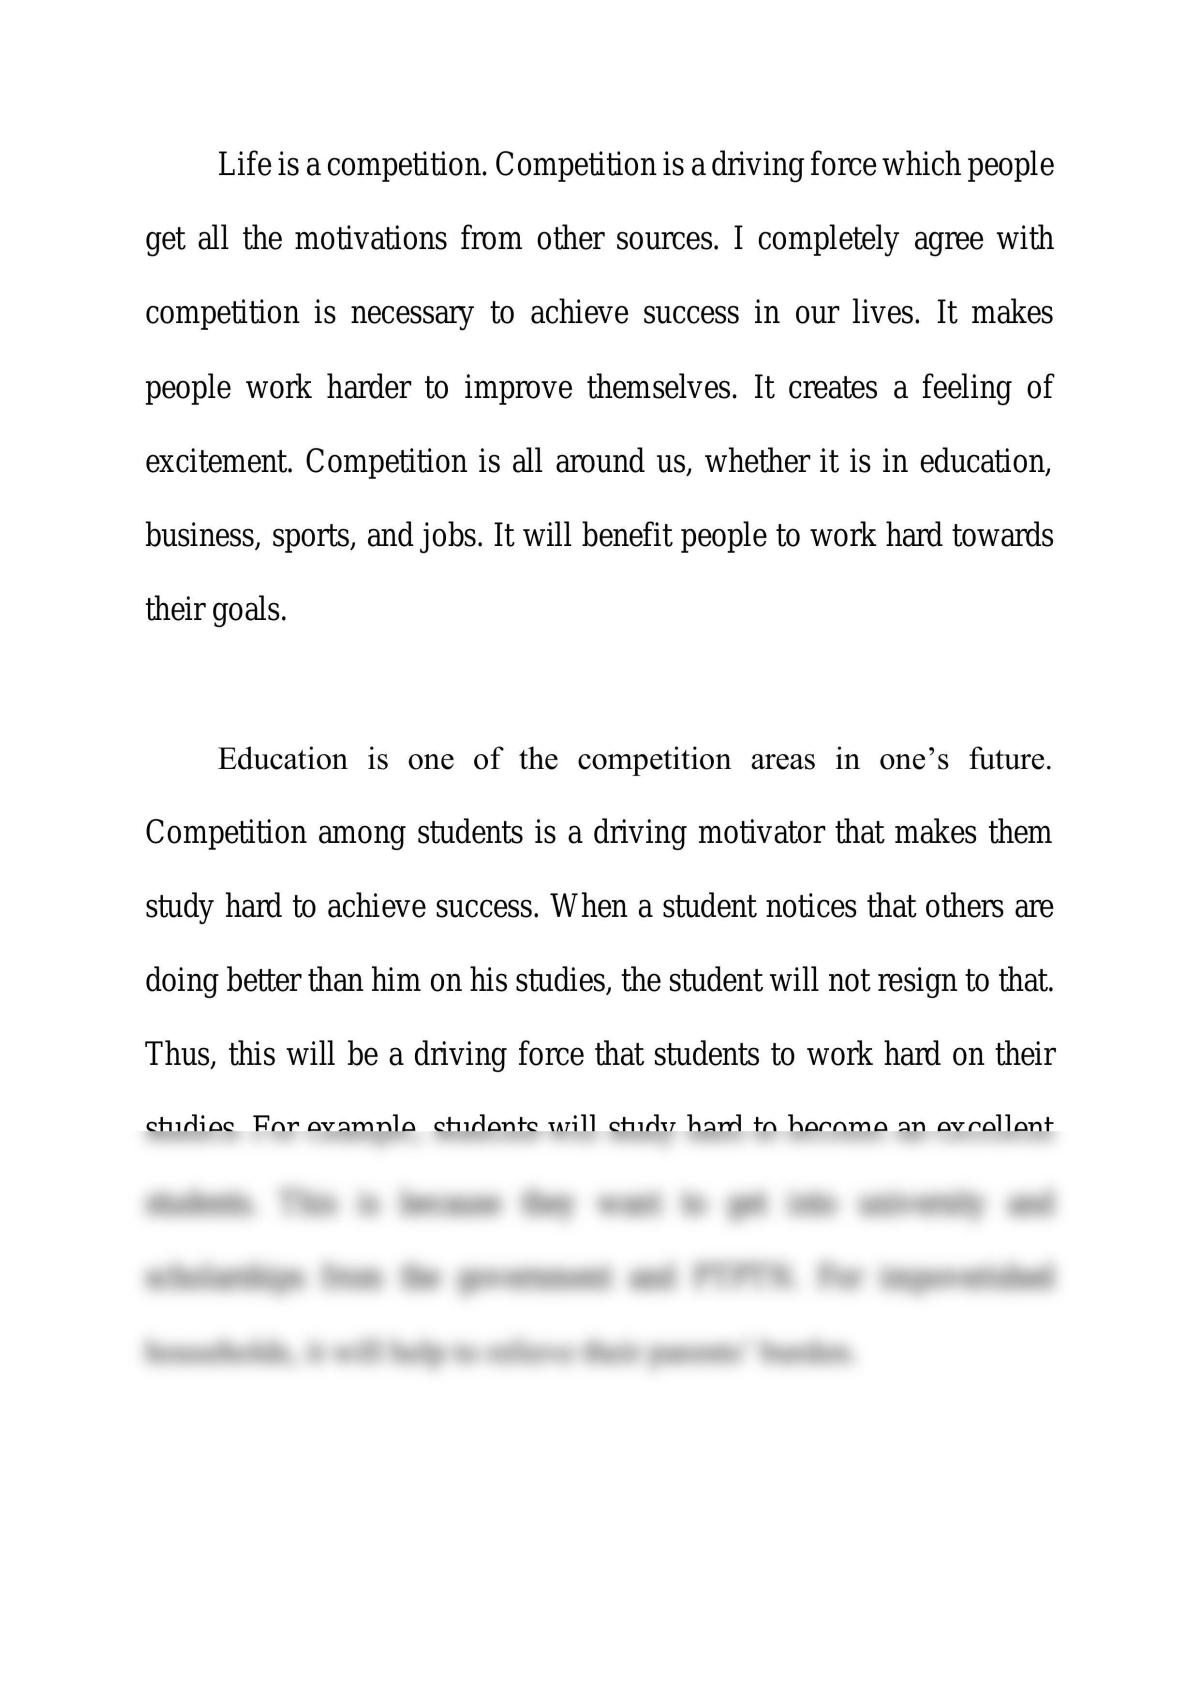 write an essay explaining why competition is necessary for success